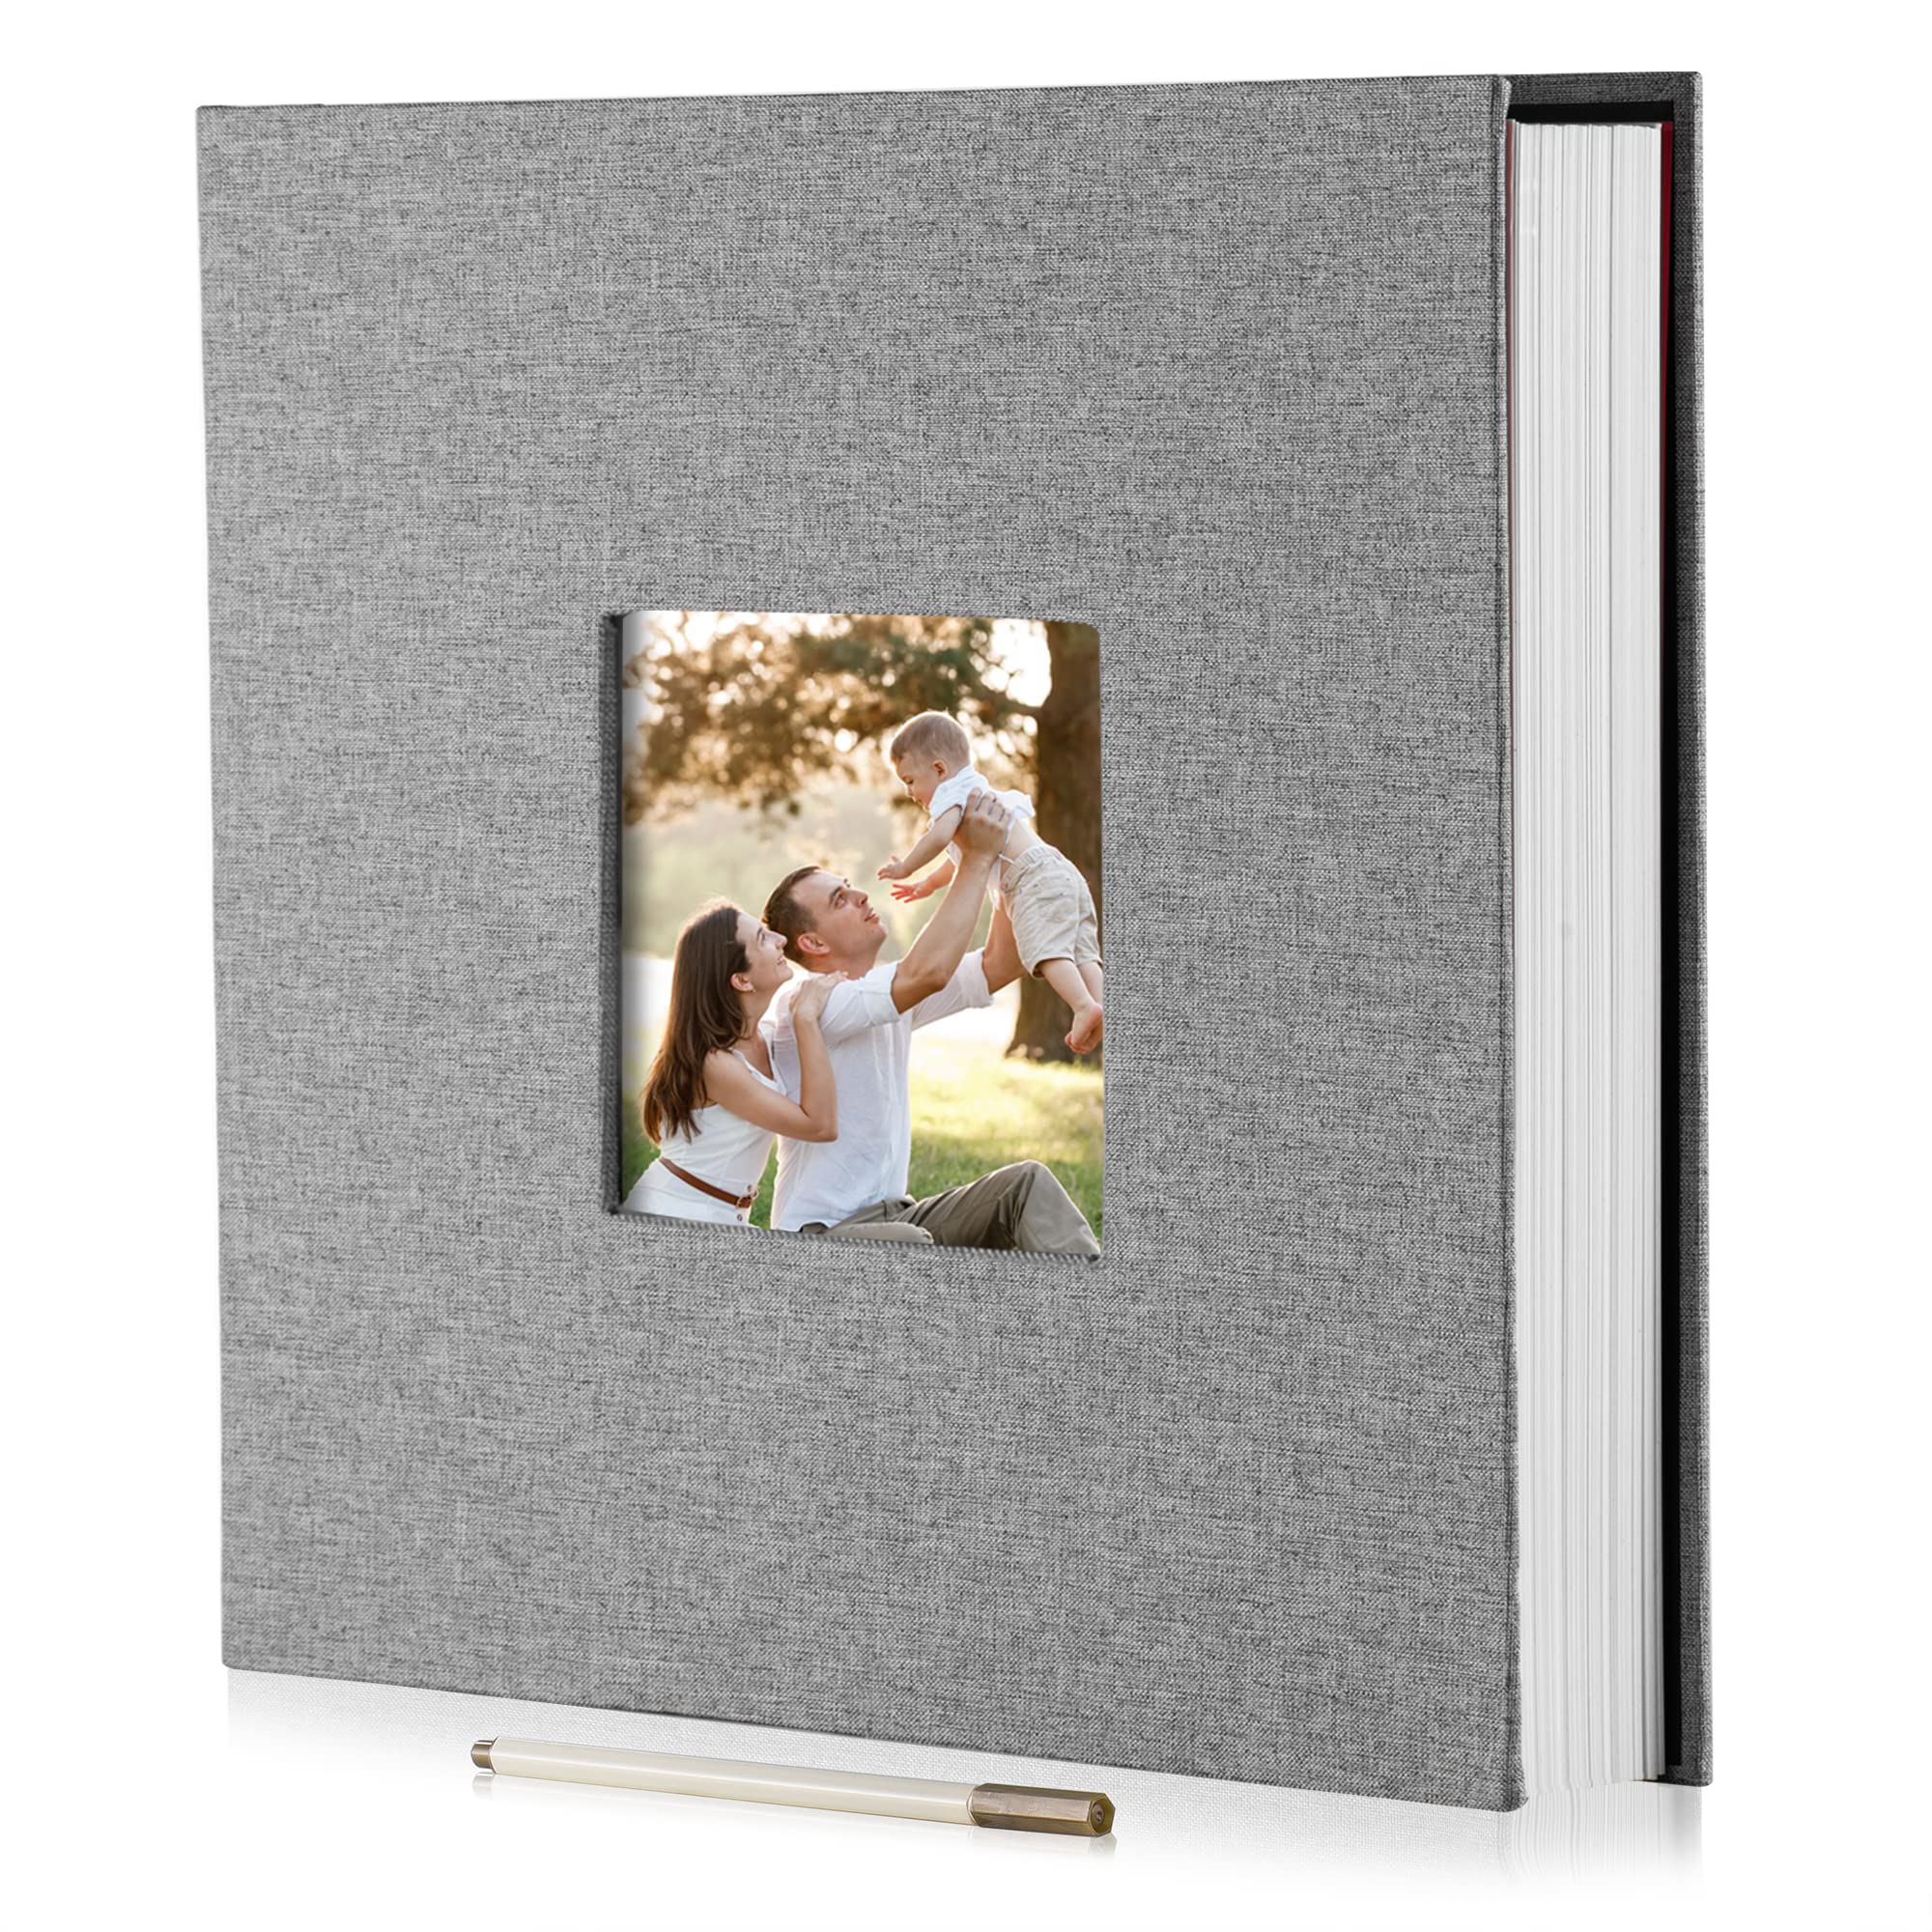 Photo Album With Sticky Pages, Large Self Adhesive Photo Album